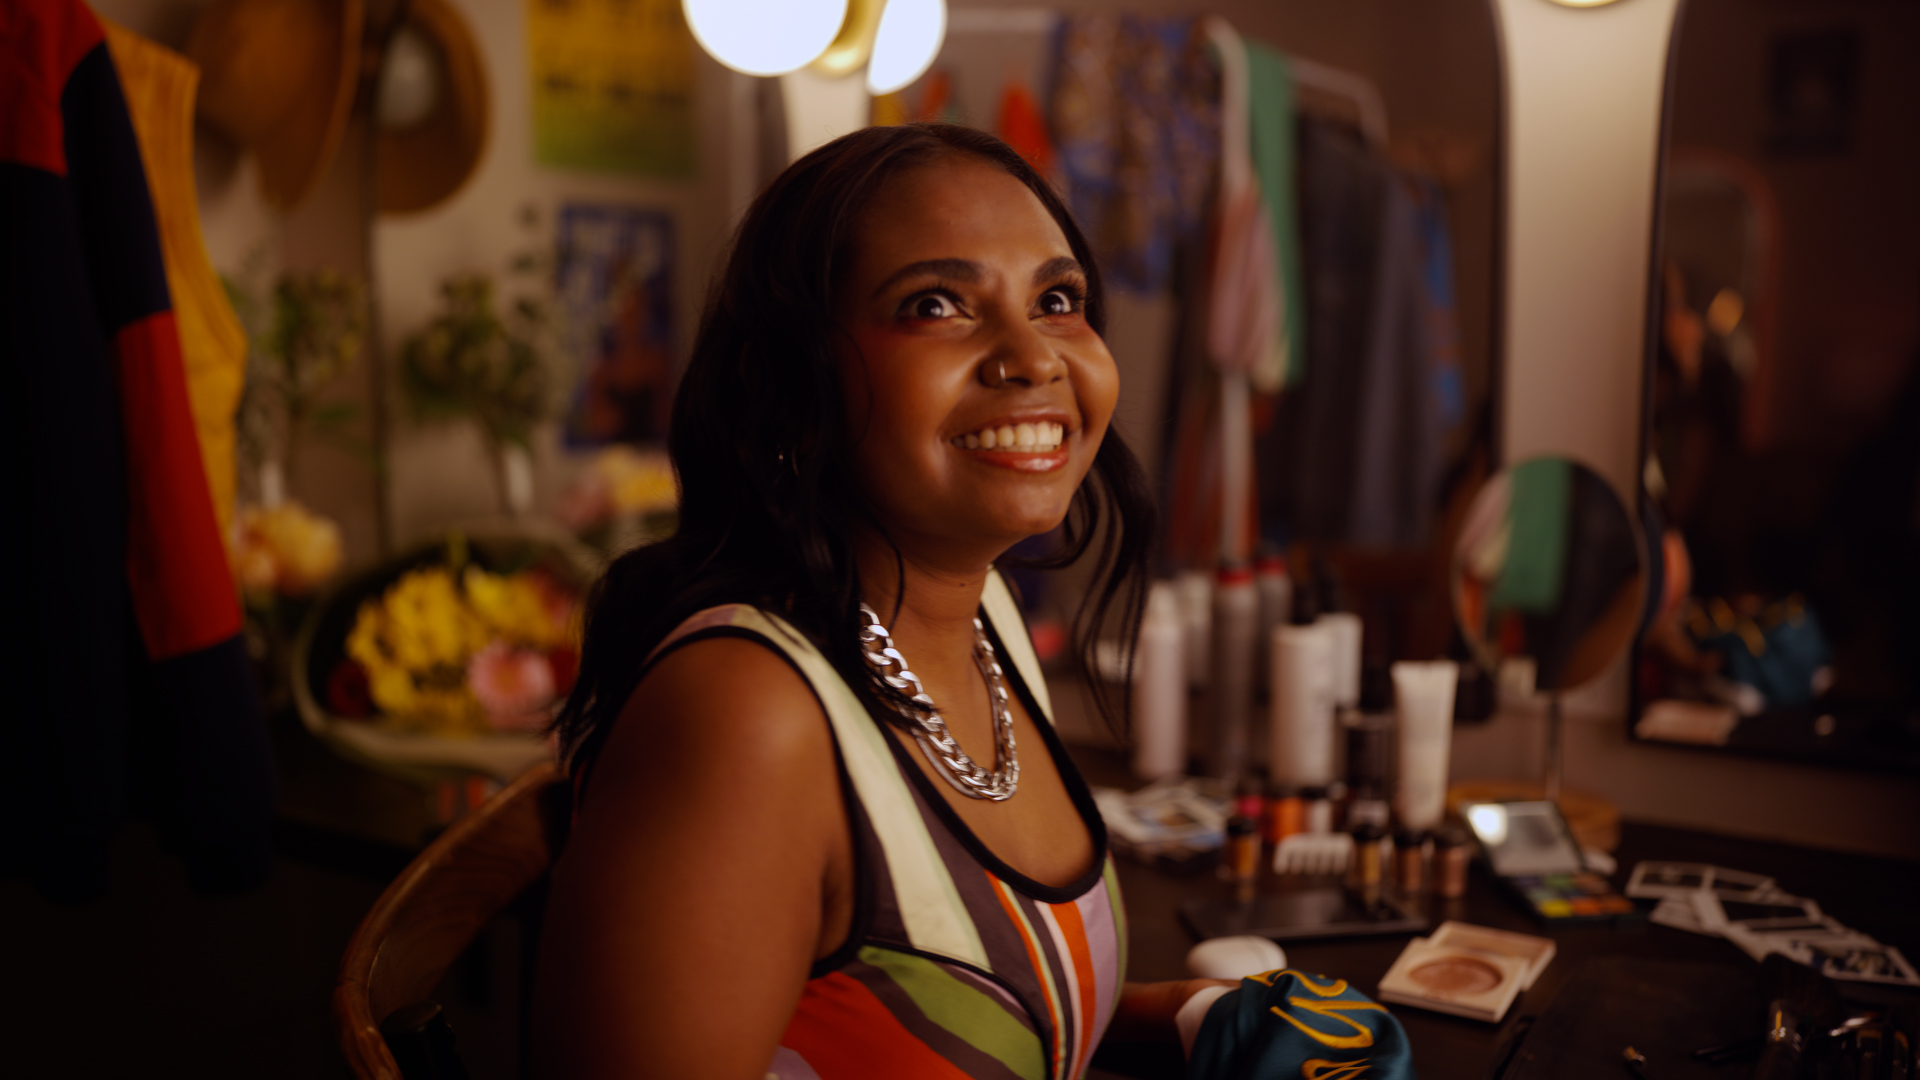 Still from google Helpfulness campaign TVC featuring a young woman smiling in a dressing room